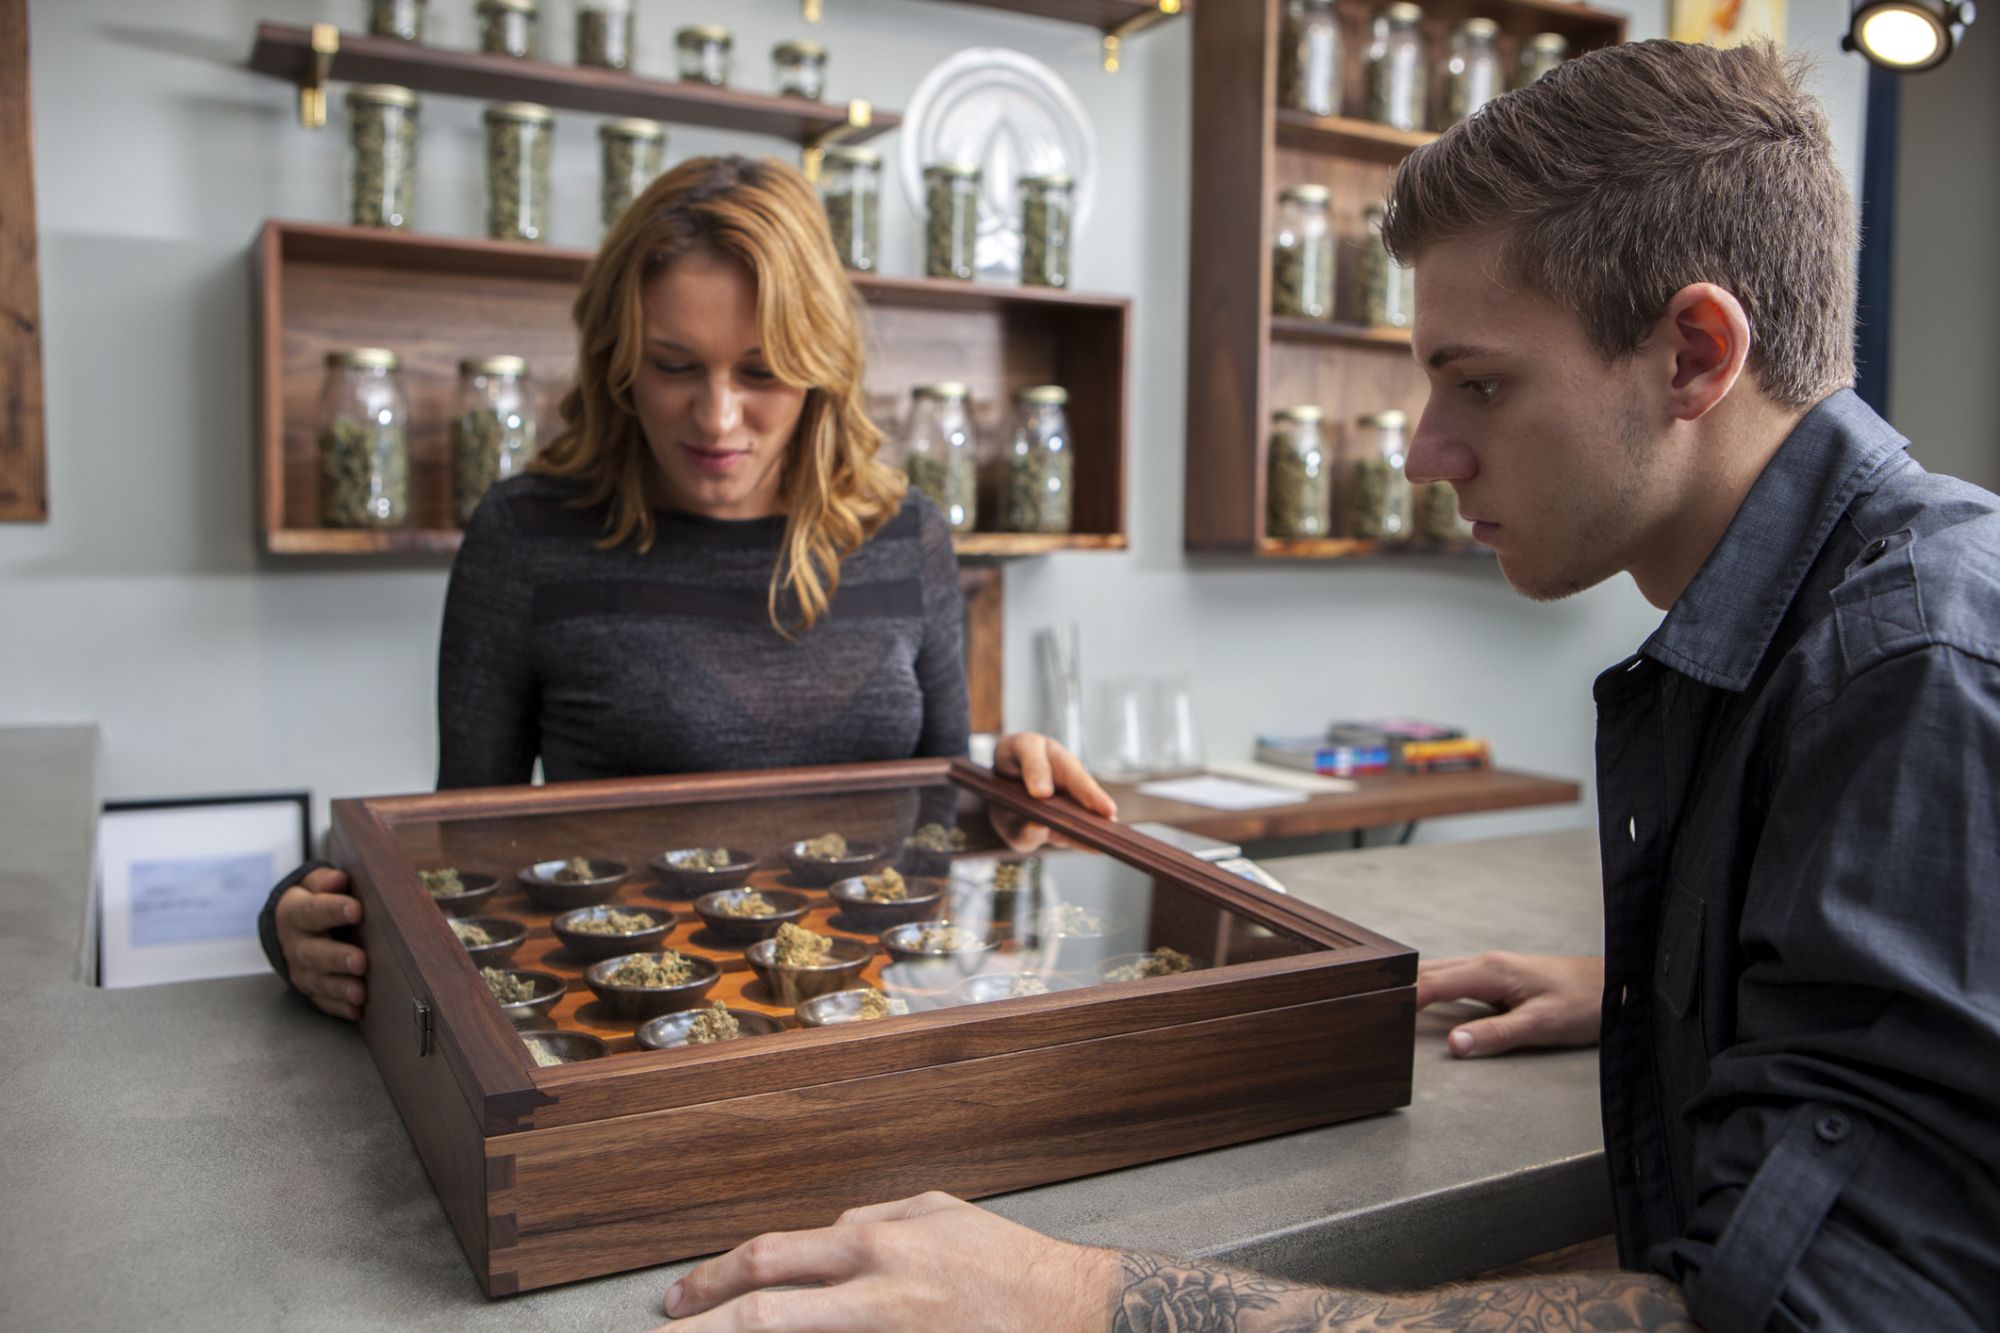 5 Opportunities for Entrepreneurs to Capitalize on America's New Relationship with Cannabis